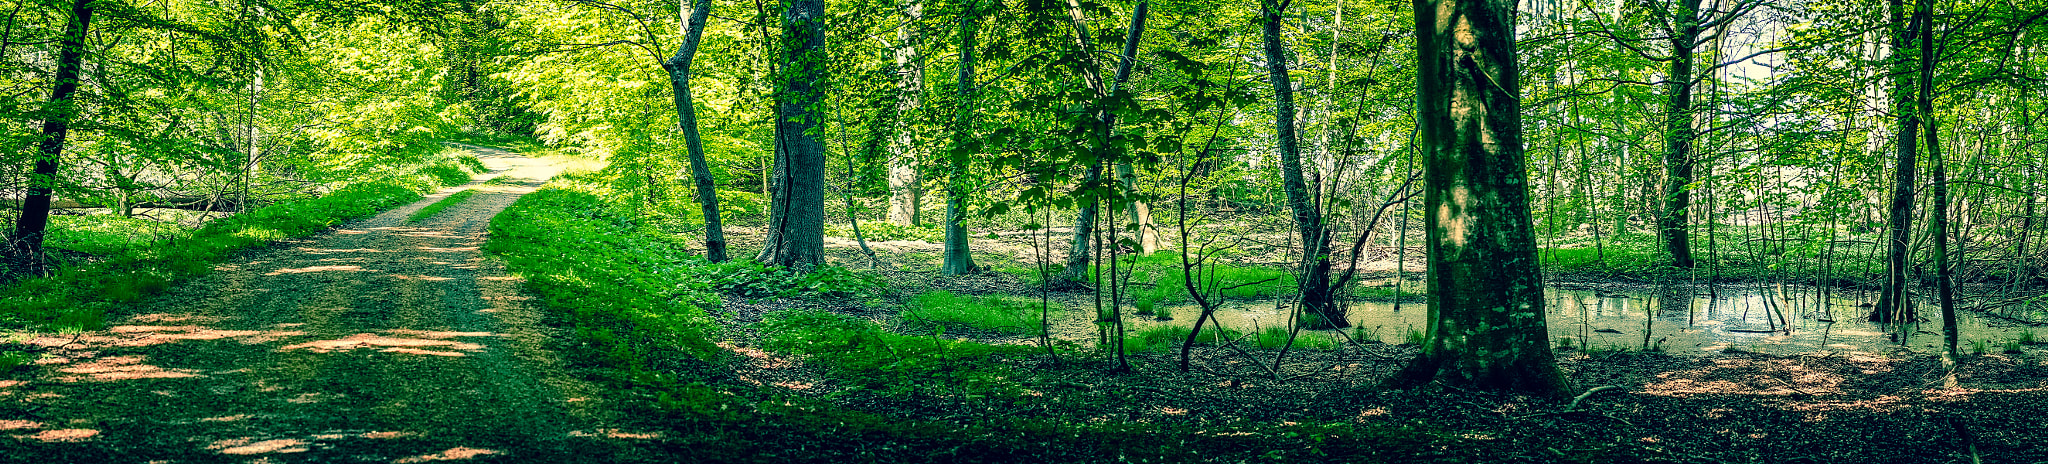 Sony a7R sample photo. Swamp area in a green forest photography